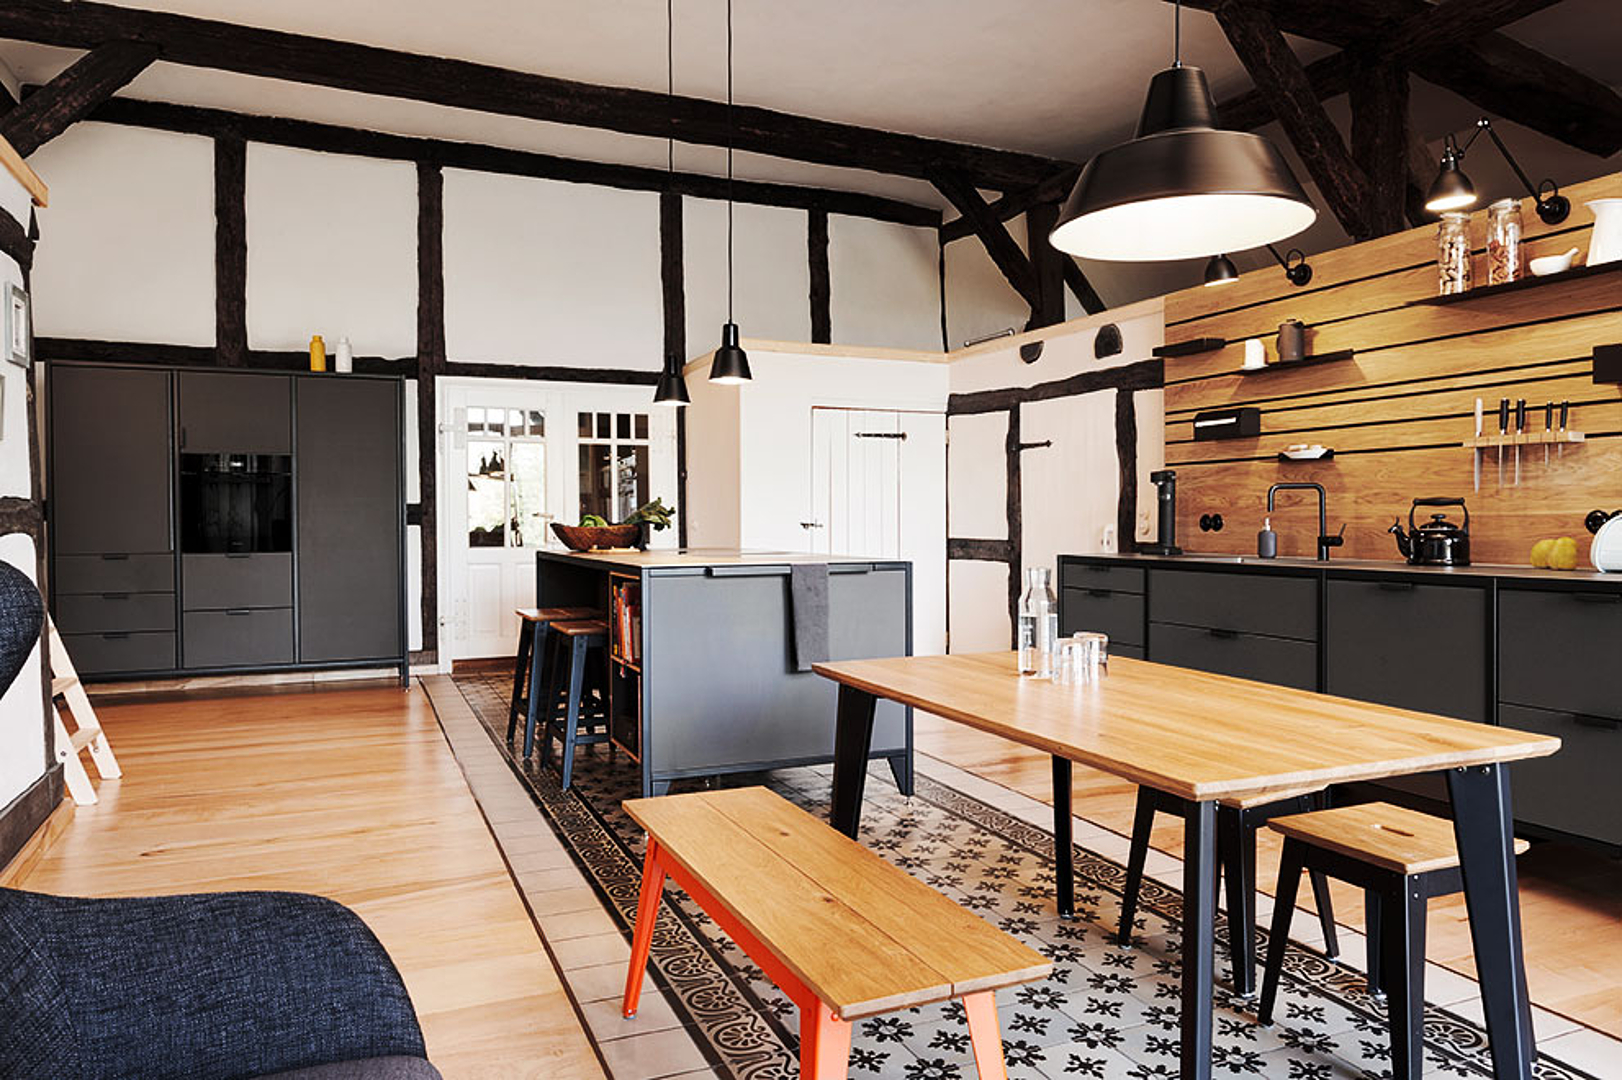 Industrial design in a listed farmhouse